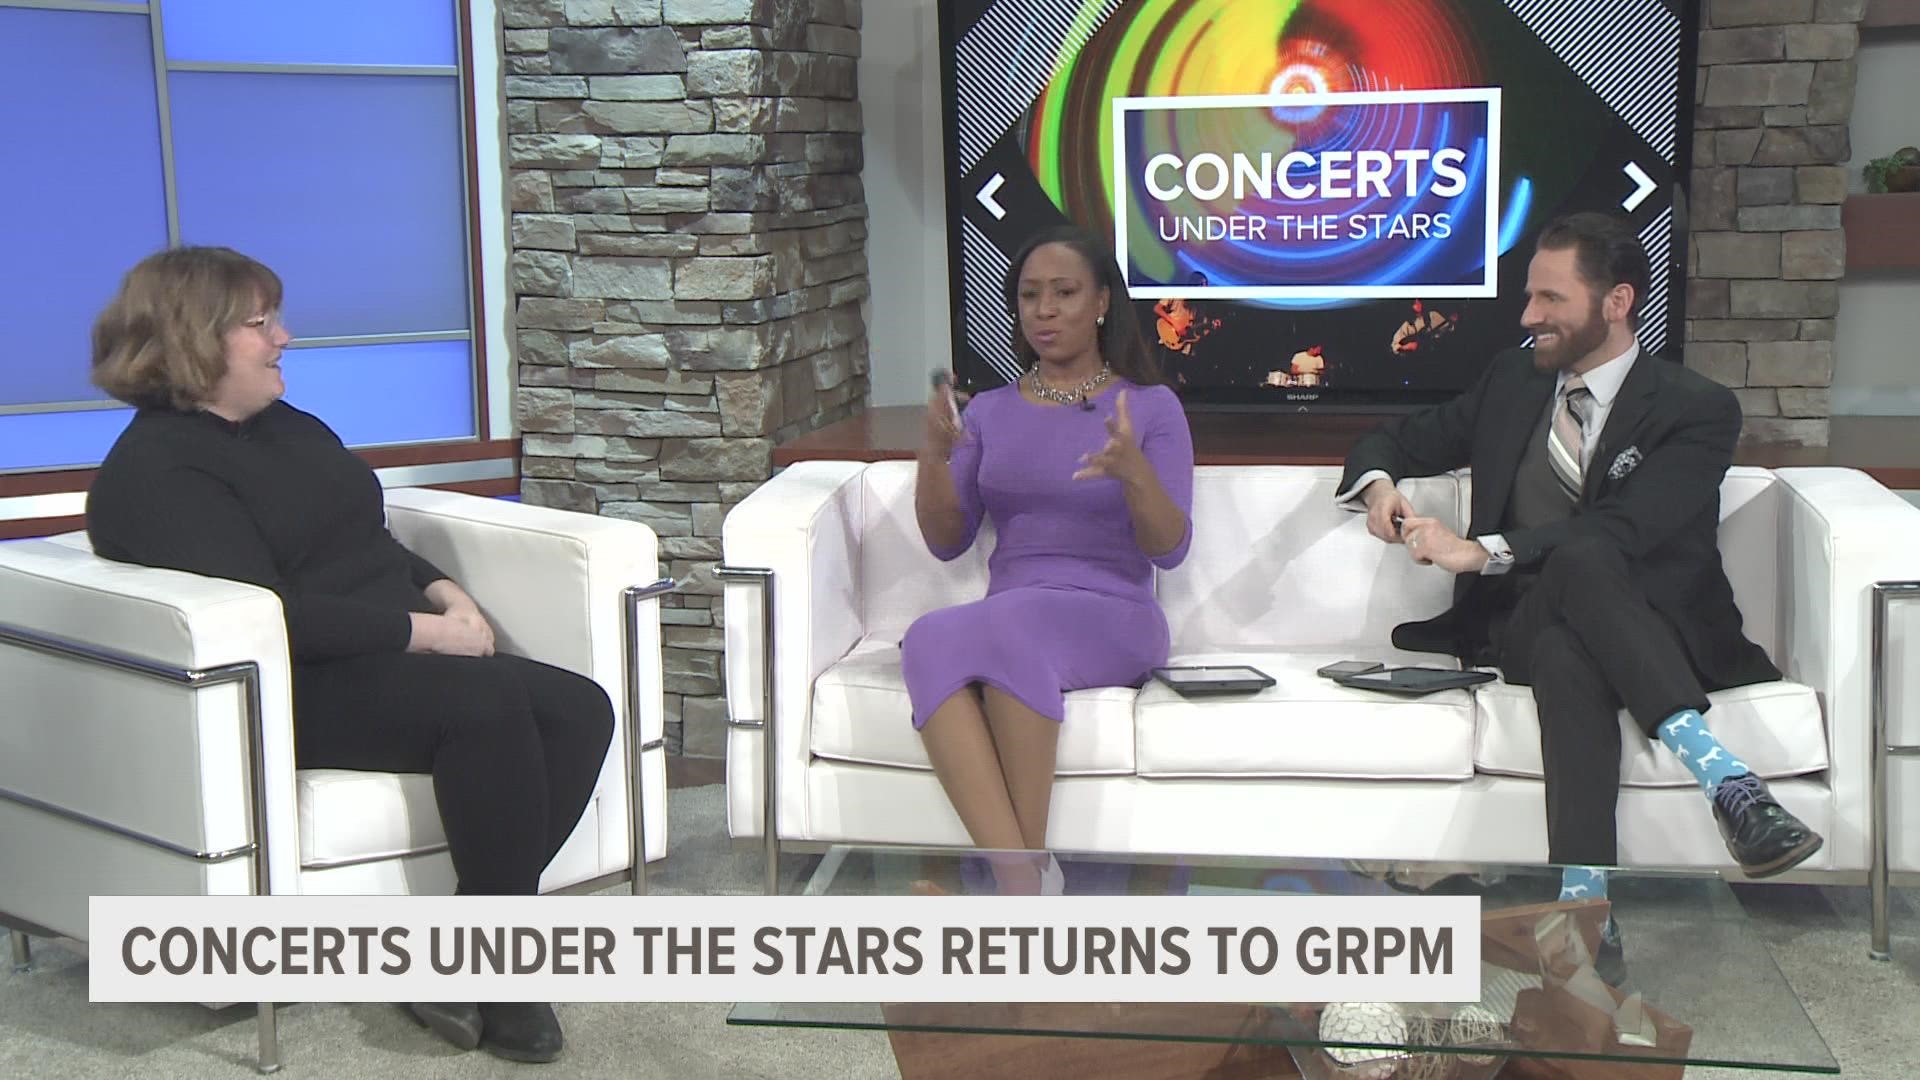 The series highlights local musicians and artists with one-of-a-kind performances in the GRPM planetarium.